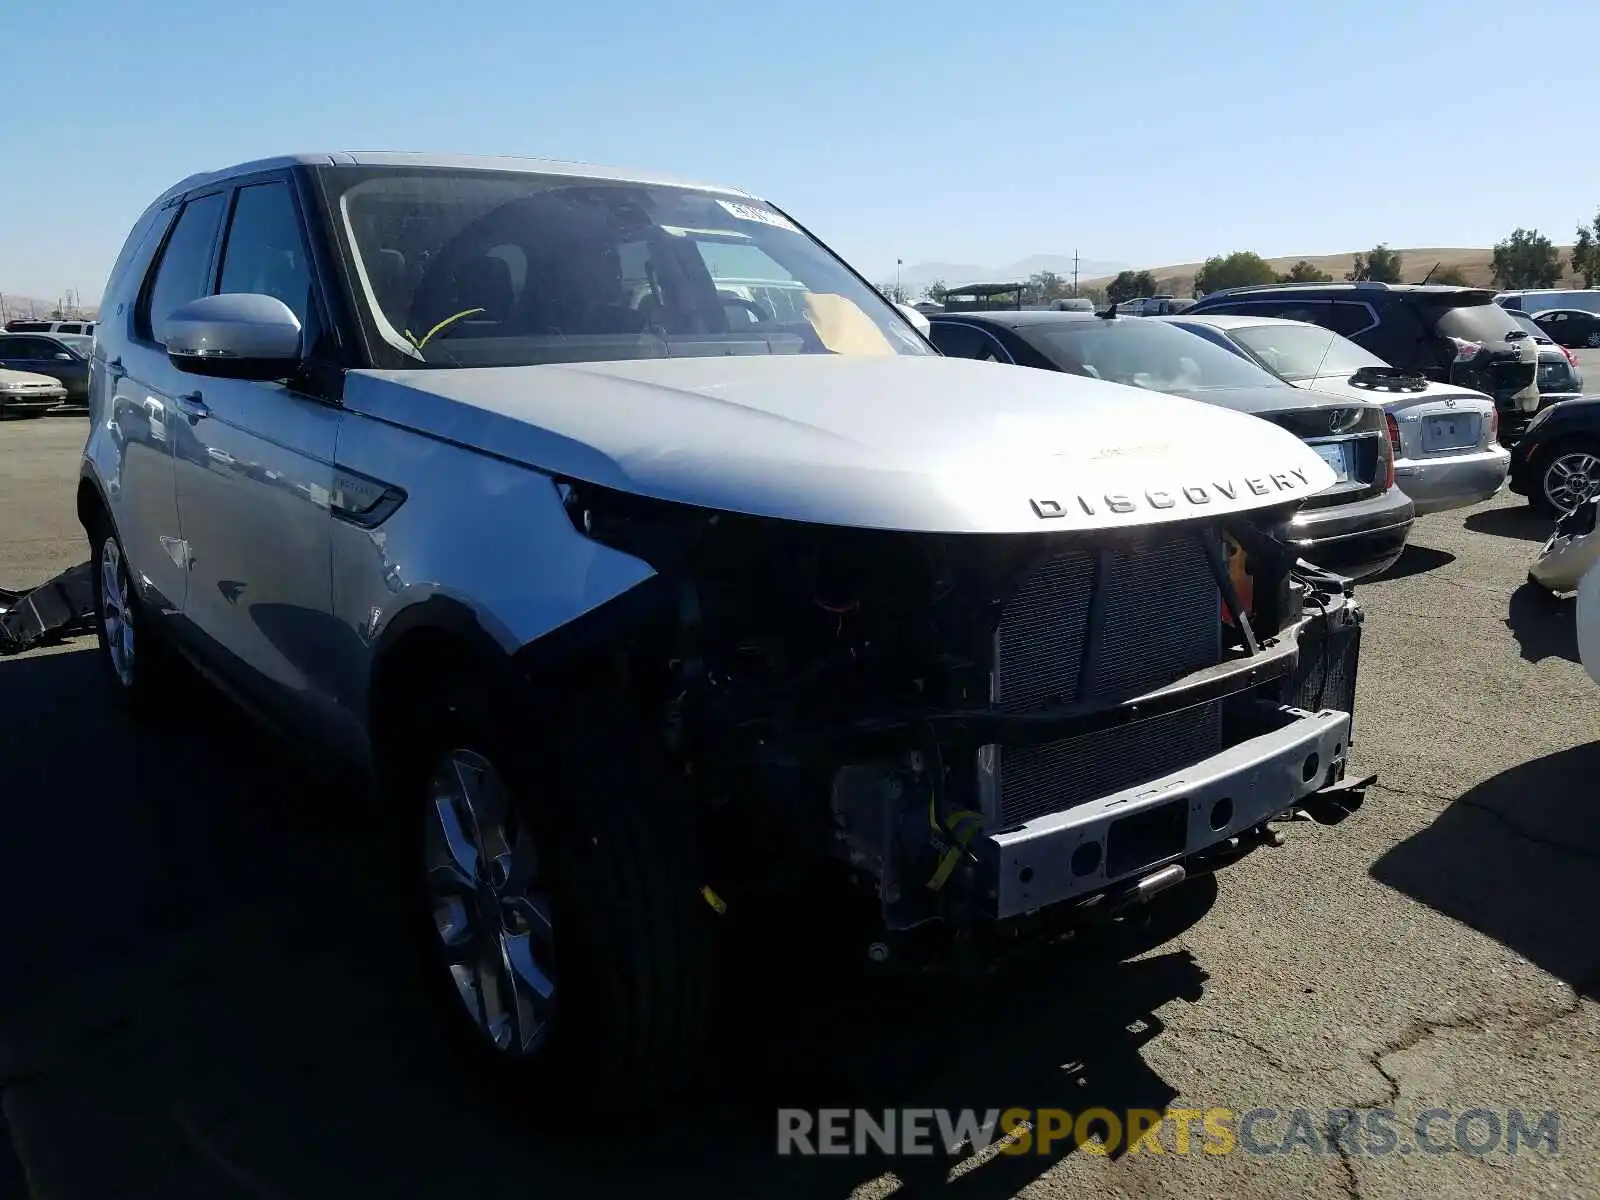 1 Photograph of a damaged car SALRG2RV3L2430054 LAND ROVER DISCOVERY 2020